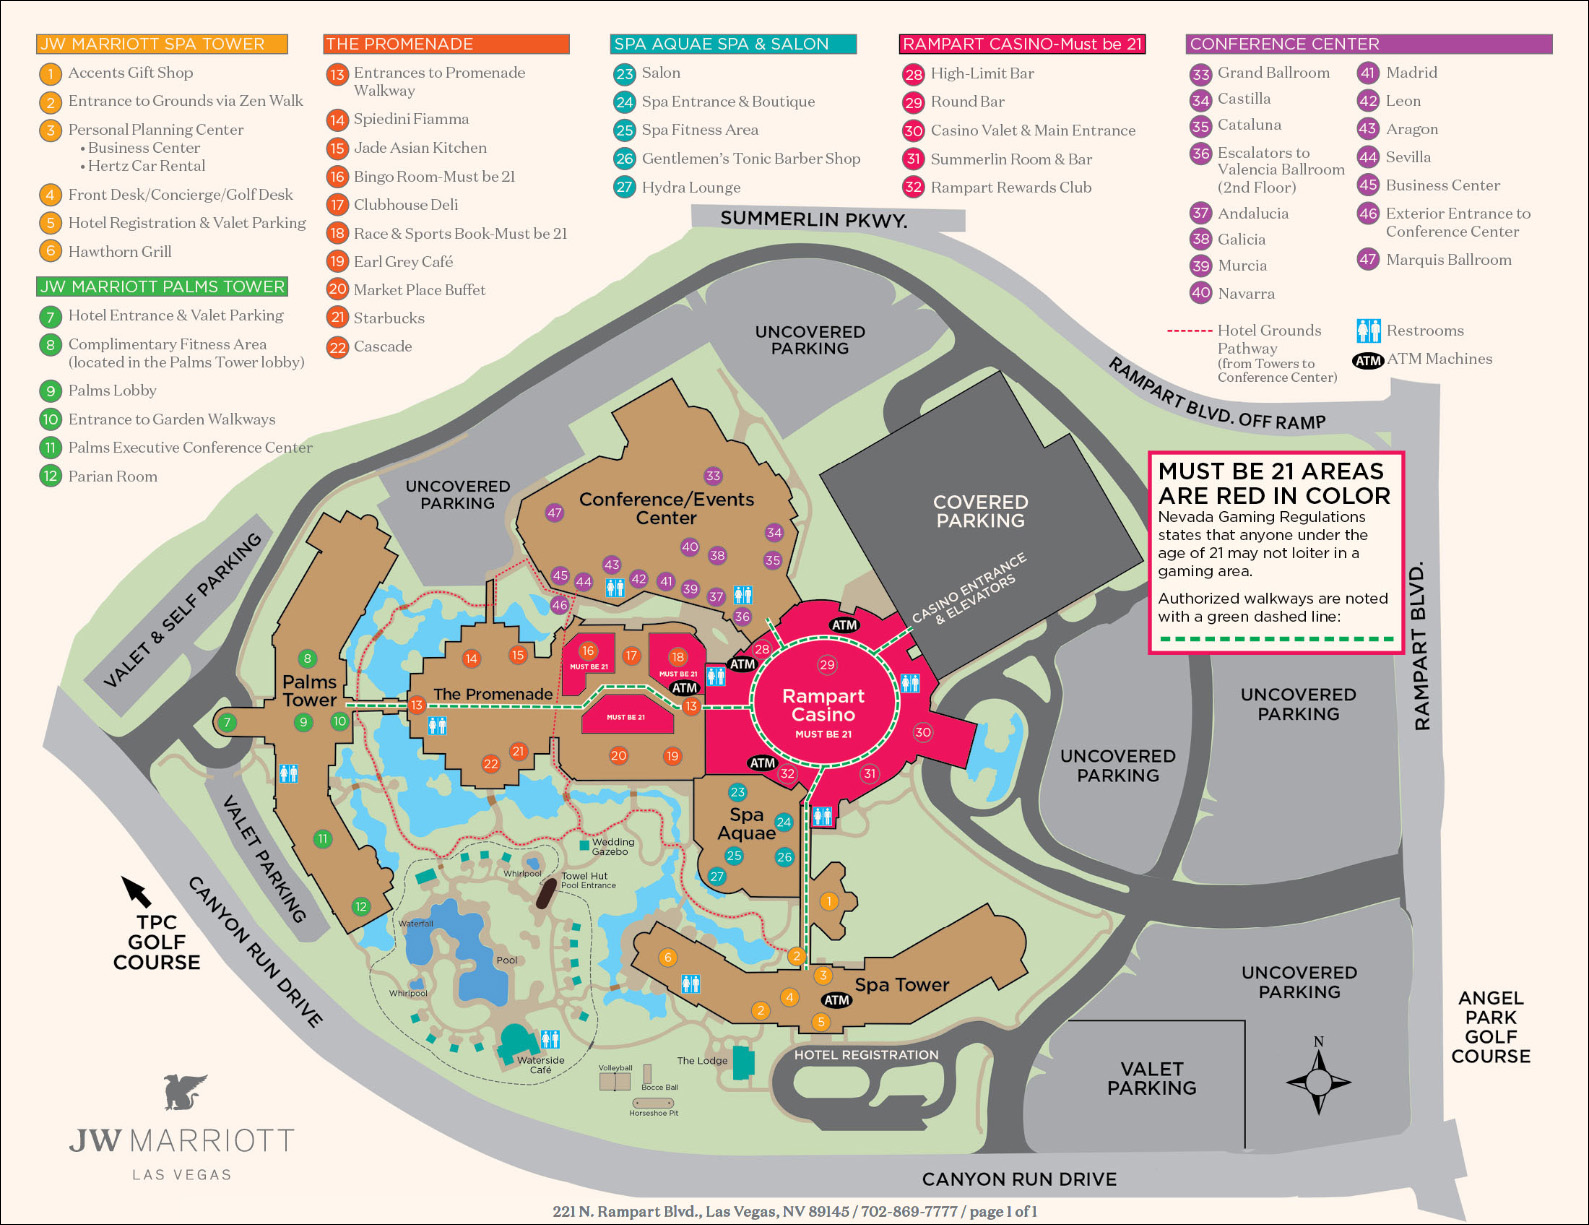 Click to view a map of the JW Marriott Las Vegas property.